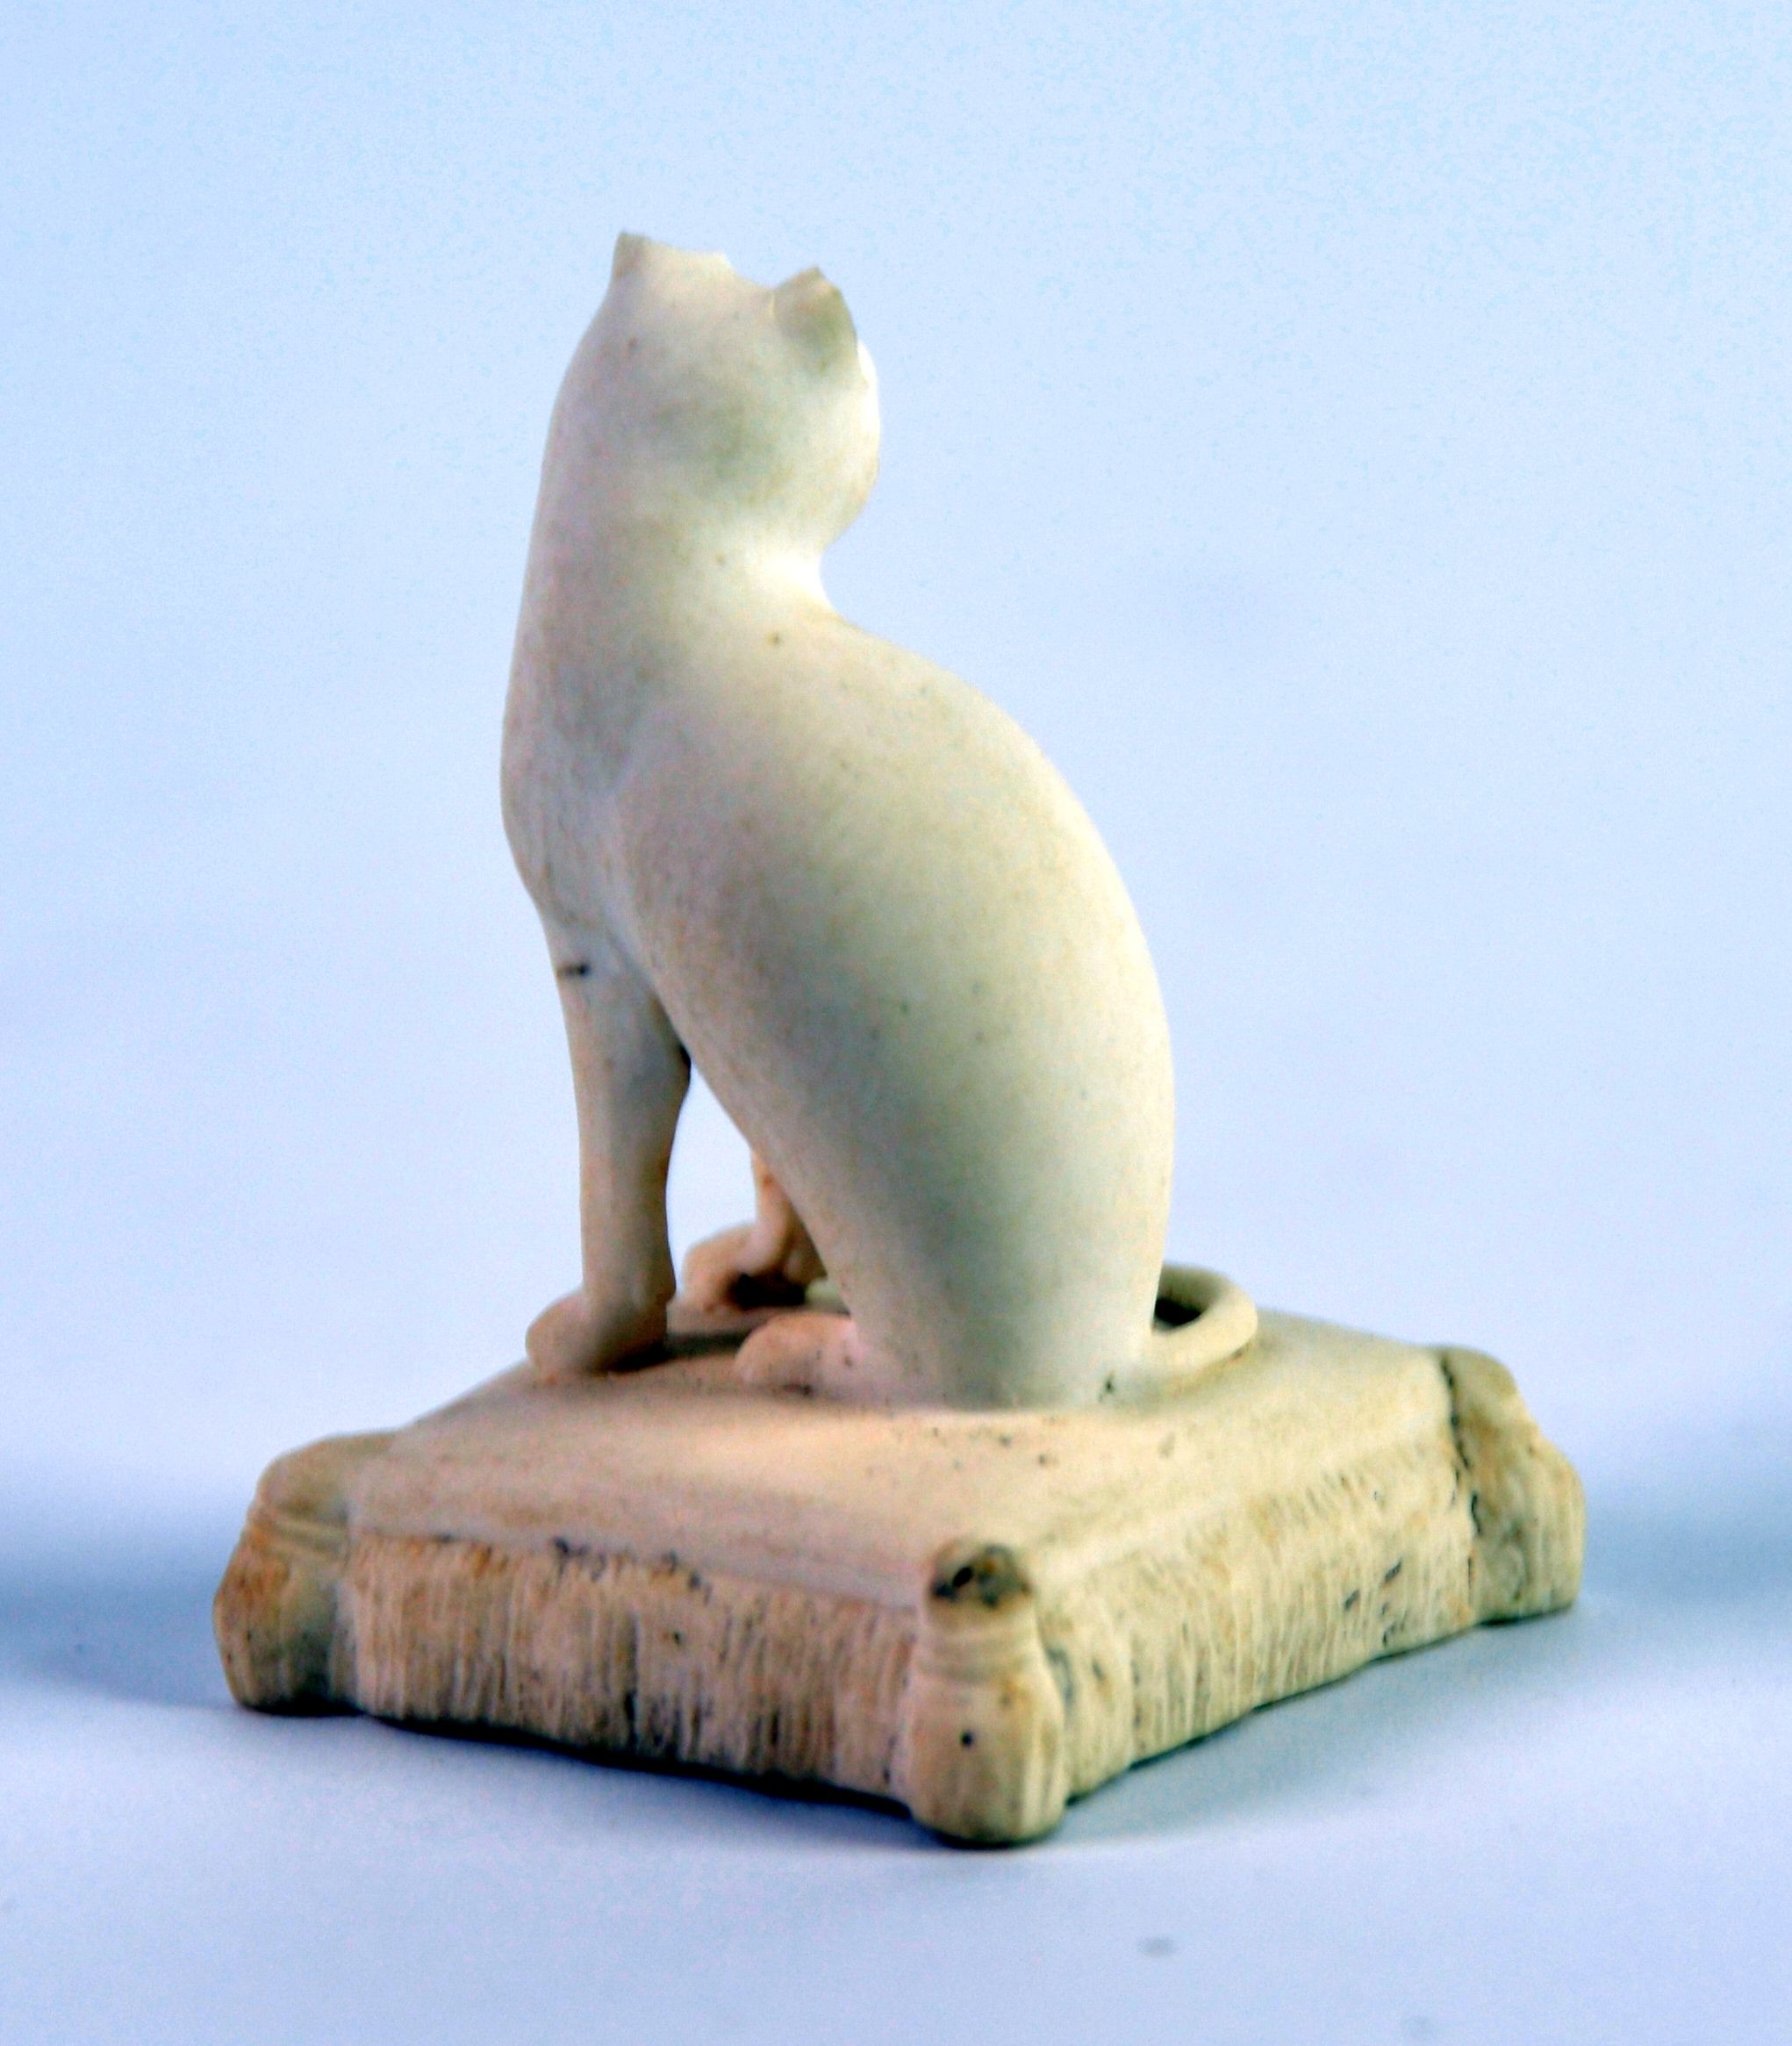 NINETEENTH CENTURY ROCKINGHAM BISCUIT PORCELAIN MODEL OF A SEATED CAT, on an oblong tasselled - Image 2 of 2